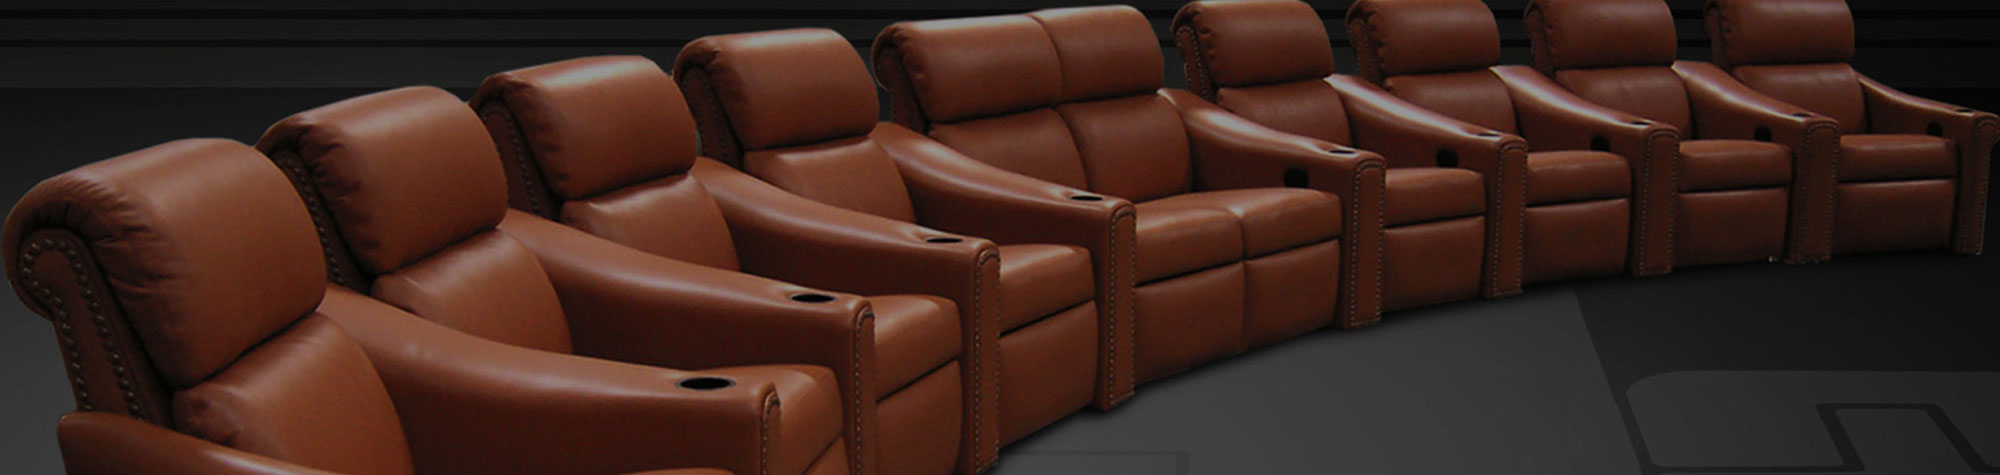 A Look at Designer Theater Seats